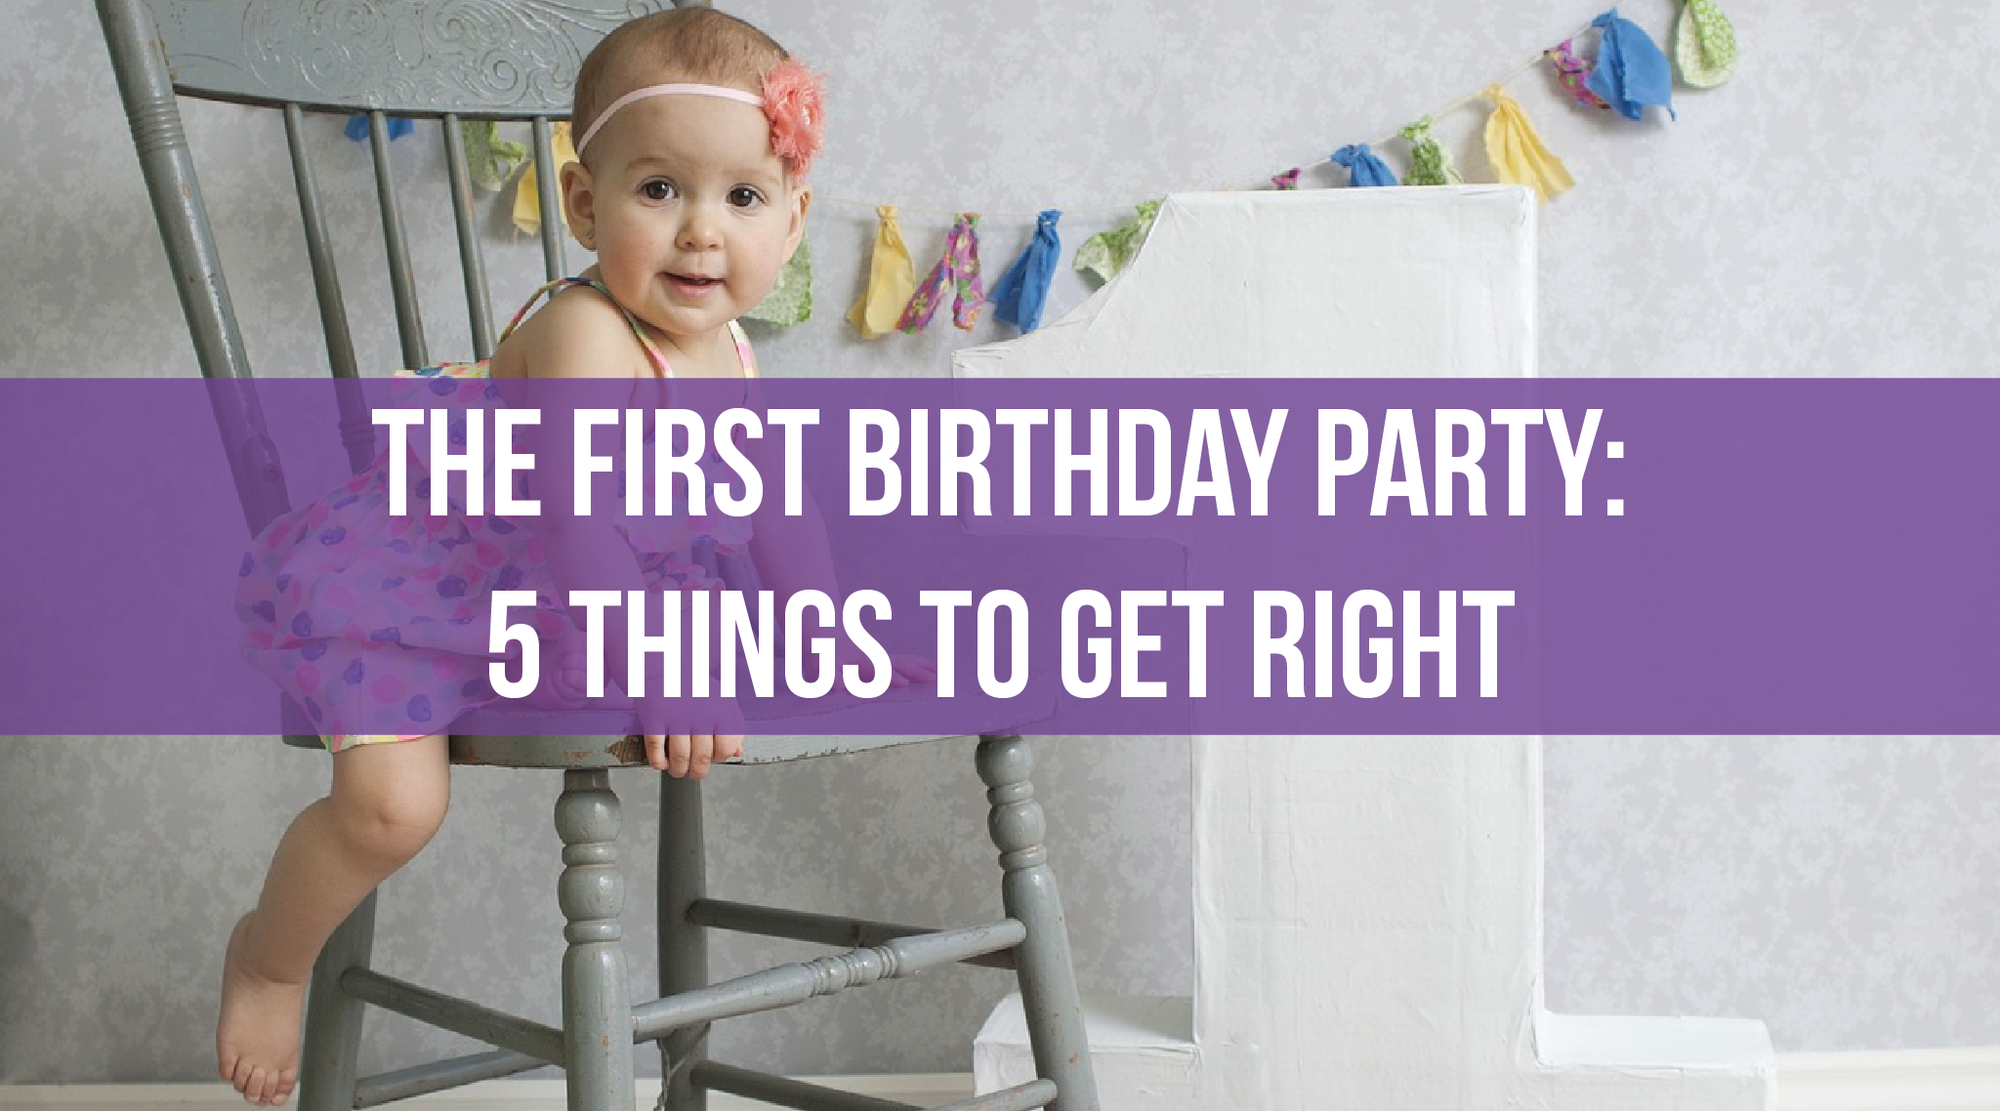 The First Birthday Party: 5 Things to Get Right